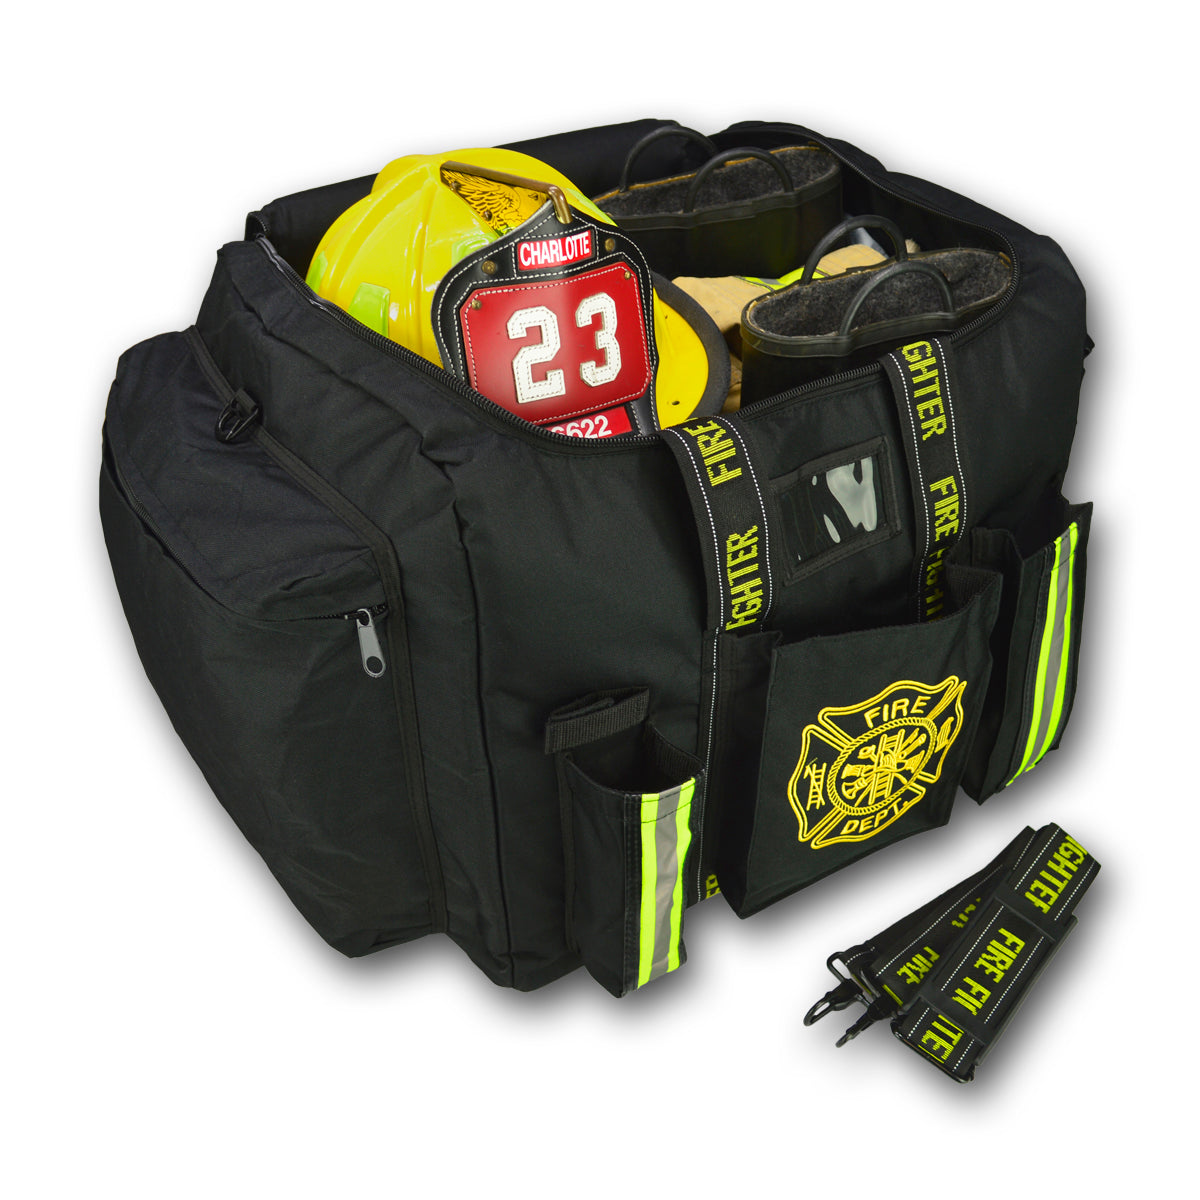 The image shows a robust black firefighter gear bag with reflective strips, multiple compartments, and a yellow helmet. It's marked with "FIRE DEPT" and includes a name tag.